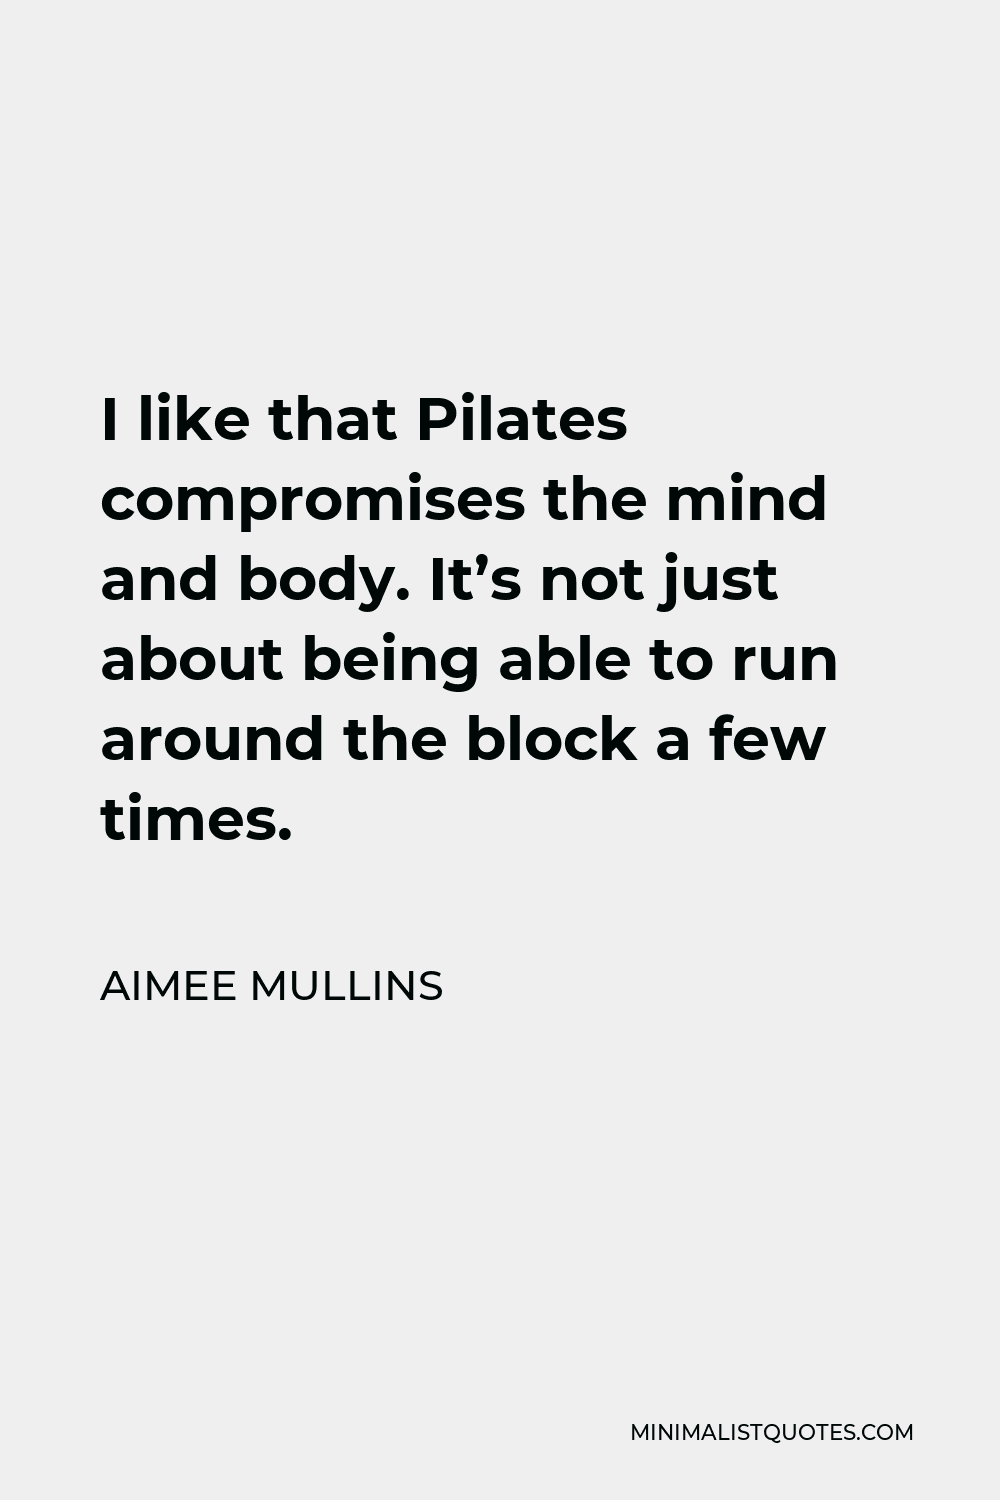 Aimee Mullins Quote - I like that Pilates compromises the mind and body. It’s not just about being able to run around the block a few times.